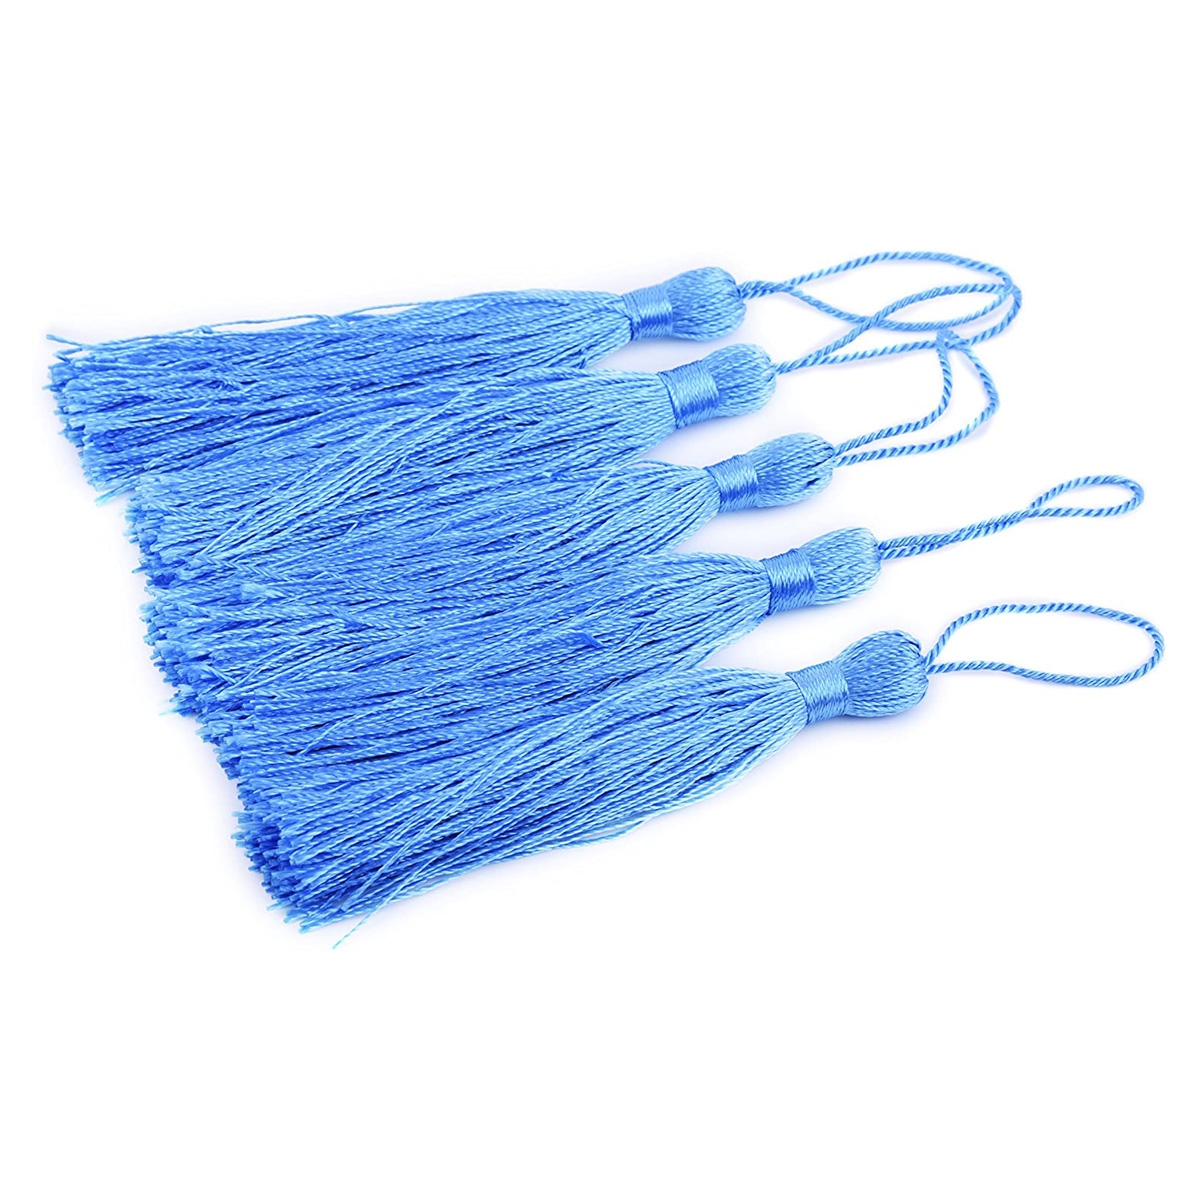 Mini Tassels with Loops for Bookmarks Jewelry Making, Decoration DIY Projects (Sky Blue)